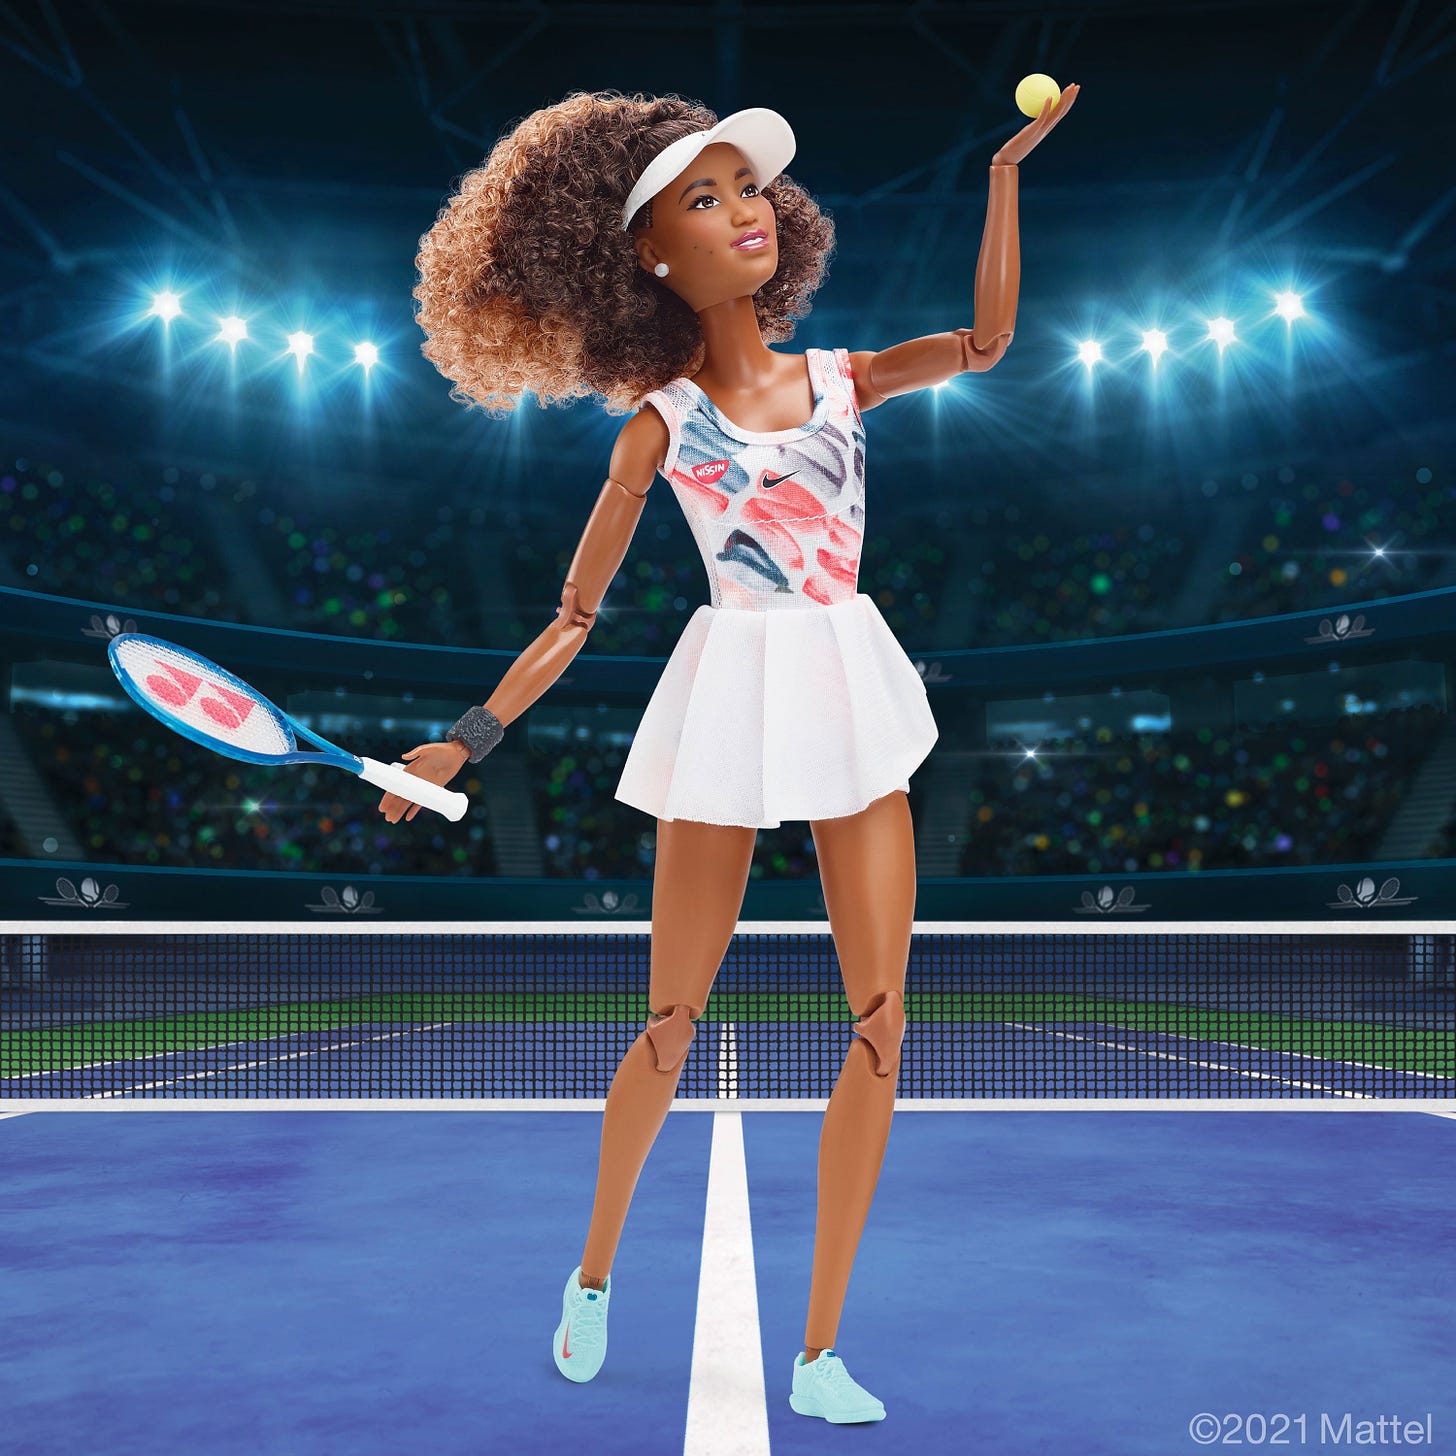 Naomi Osaka Barbie doll sells out shortly after launch - CNN Style